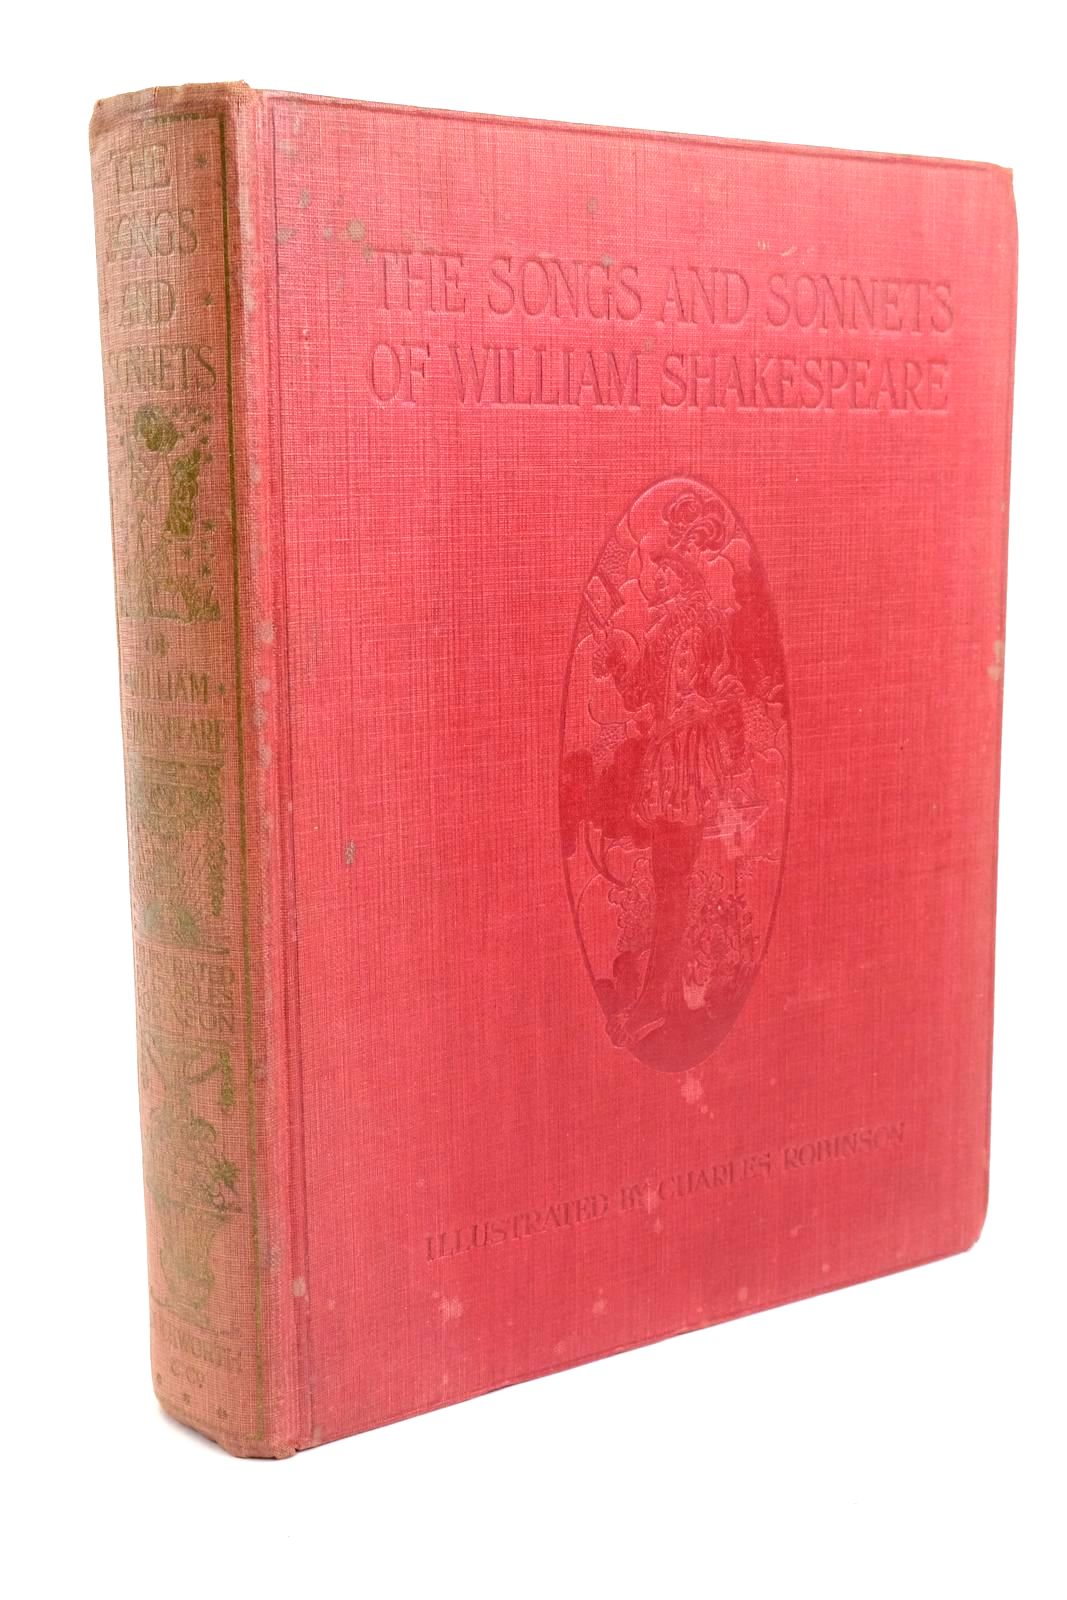 Photo of THE SONGS AND SONNETS OF WILLIAM SHAKESPEARE written by Shakespeare, William illustrated by Robinson, Charles published by Duckworth &amp; Co. (STOCK CODE: 1322269)  for sale by Stella & Rose's Books